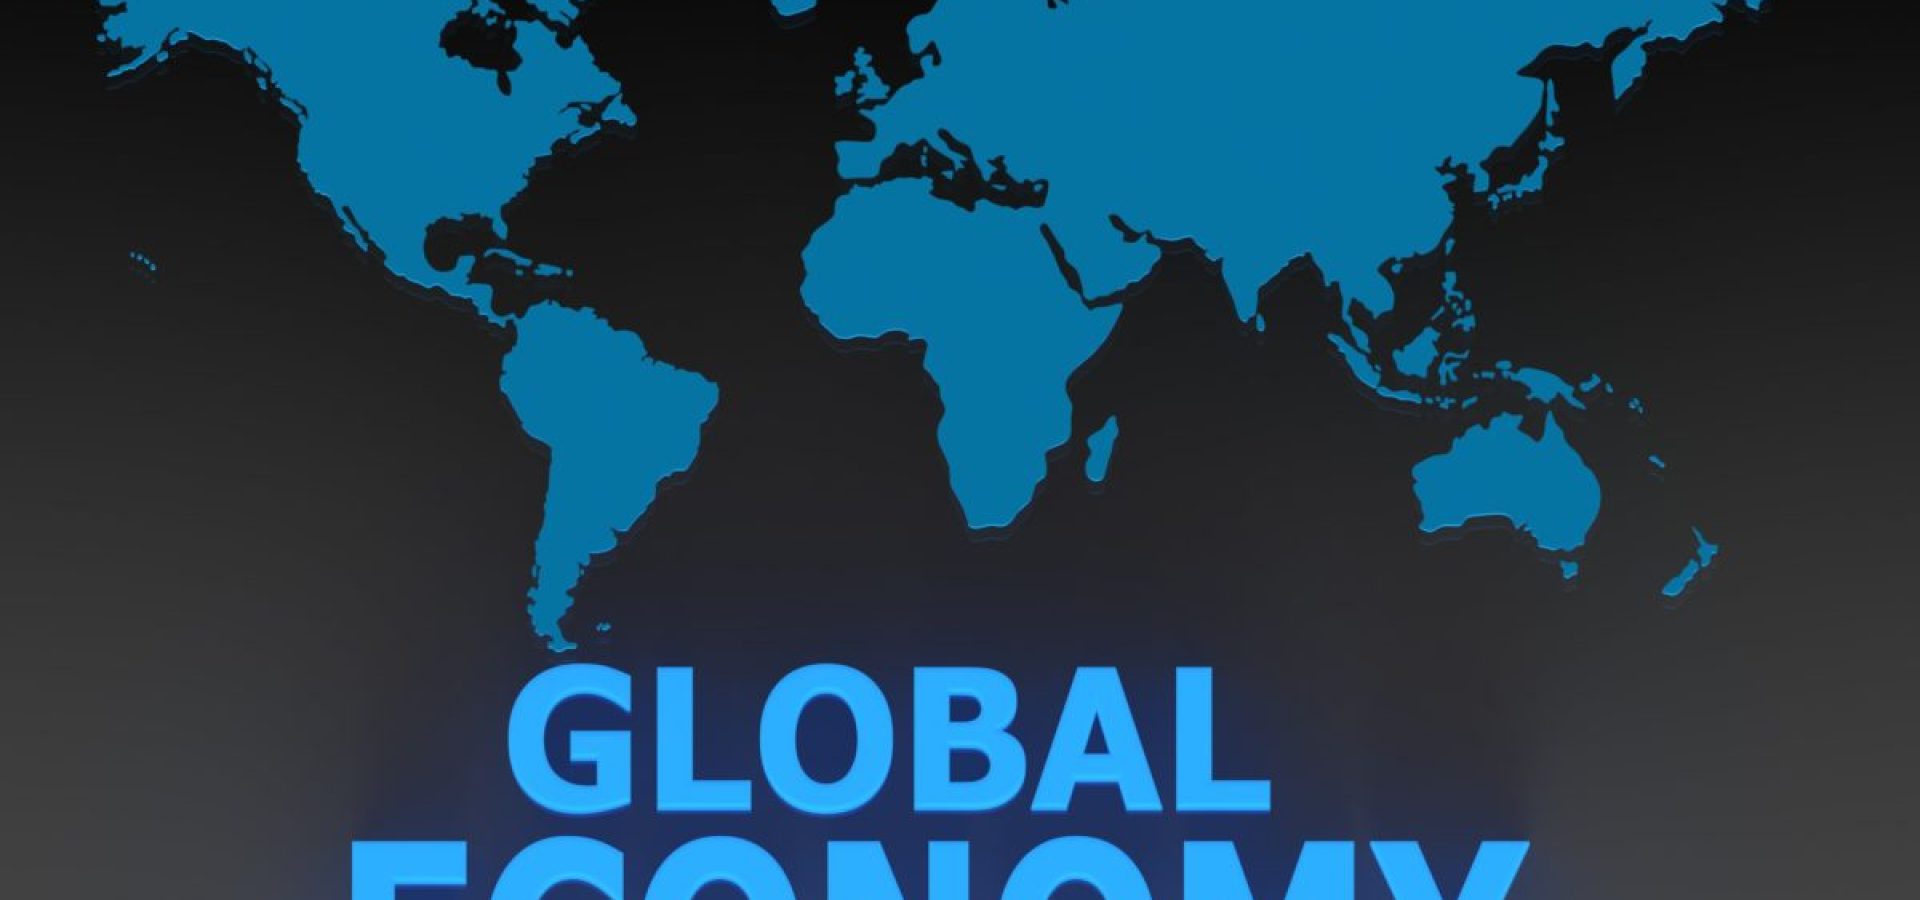 The future of the global economy